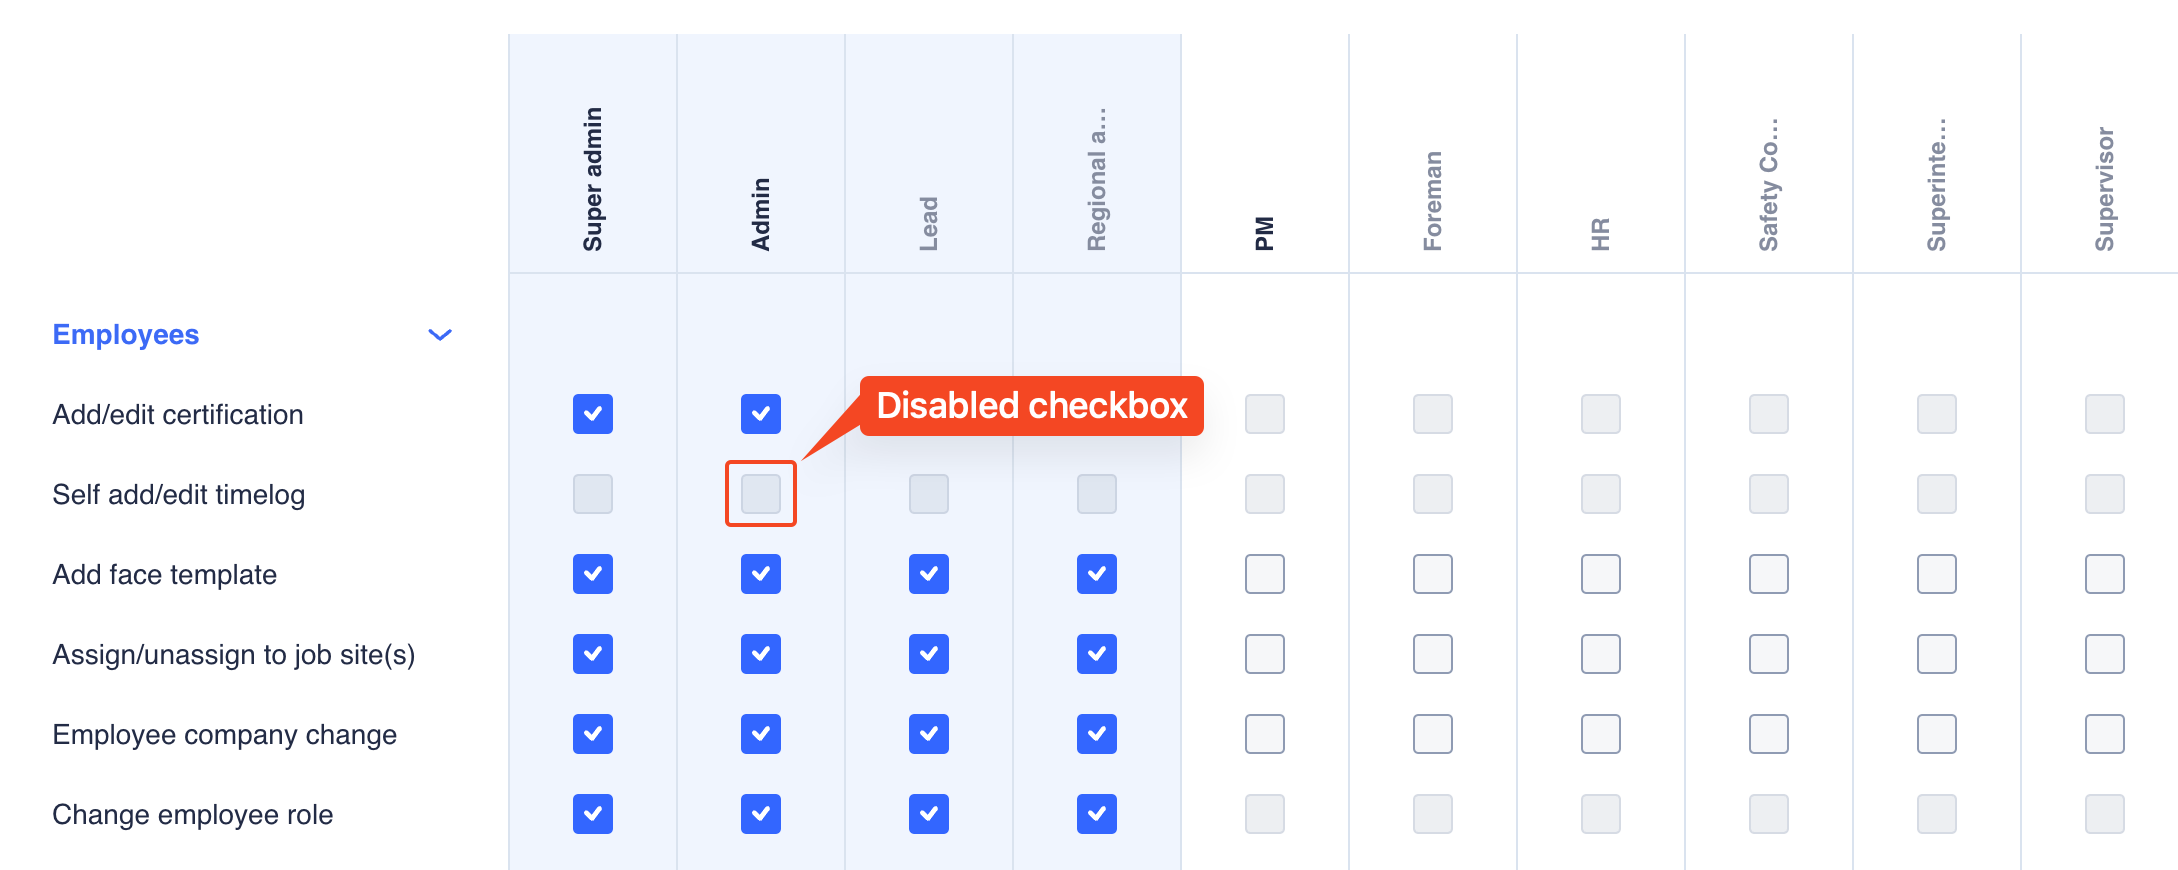 Disabled checkbox example